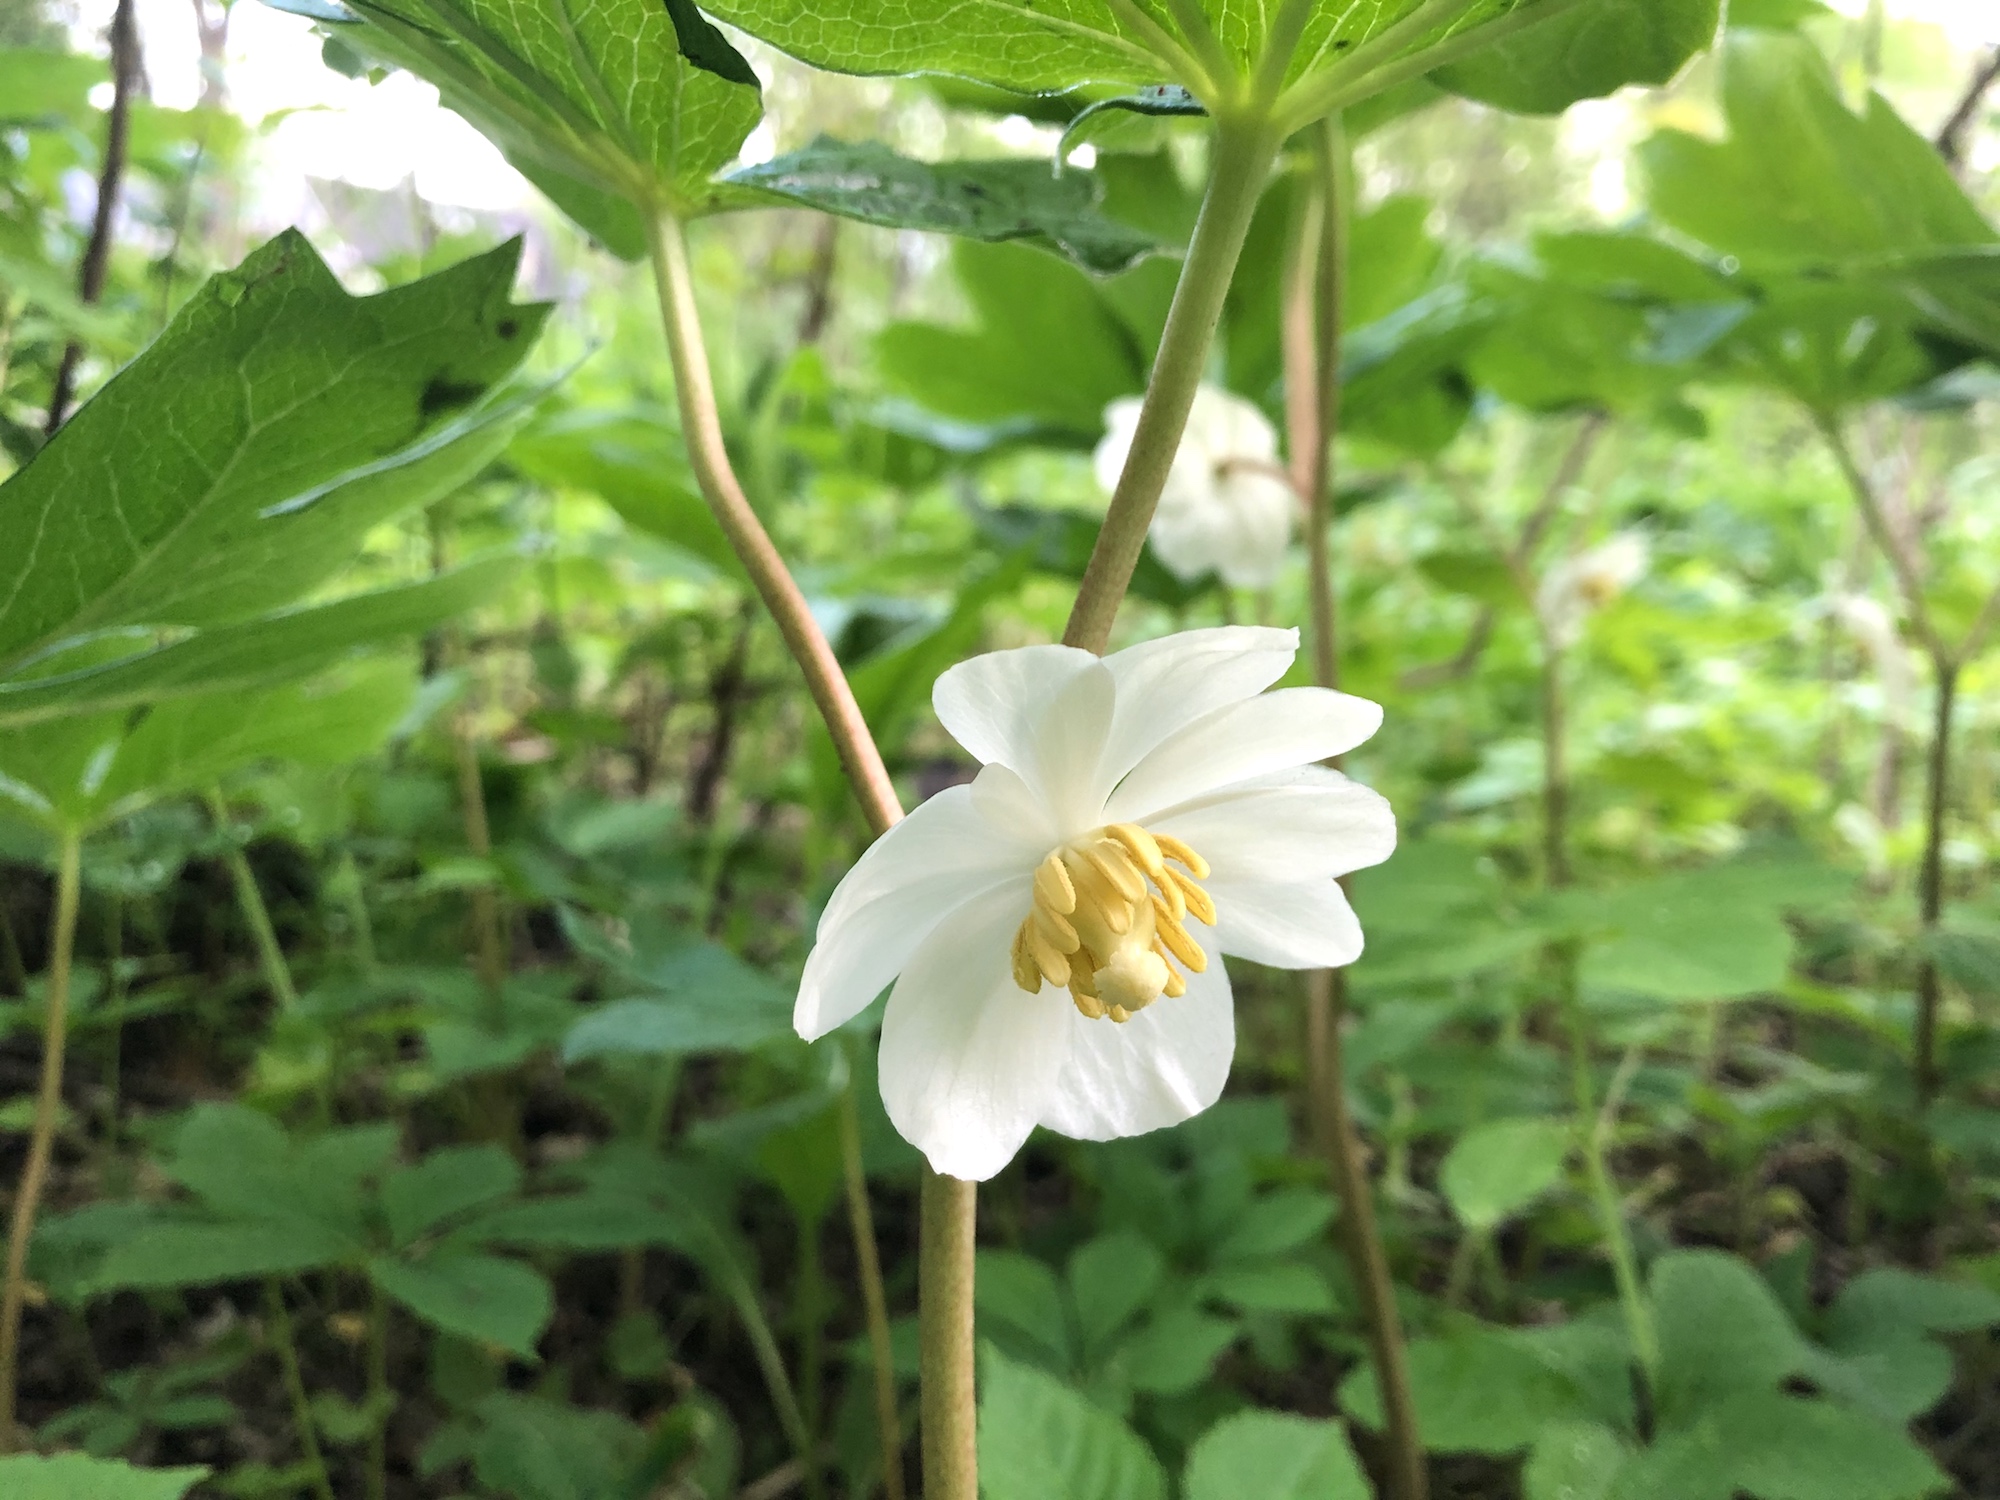 Mayapple blooms in wood between Duck Pond and Marion Dunn in Madison, Wisconsin on May 25, 2020.